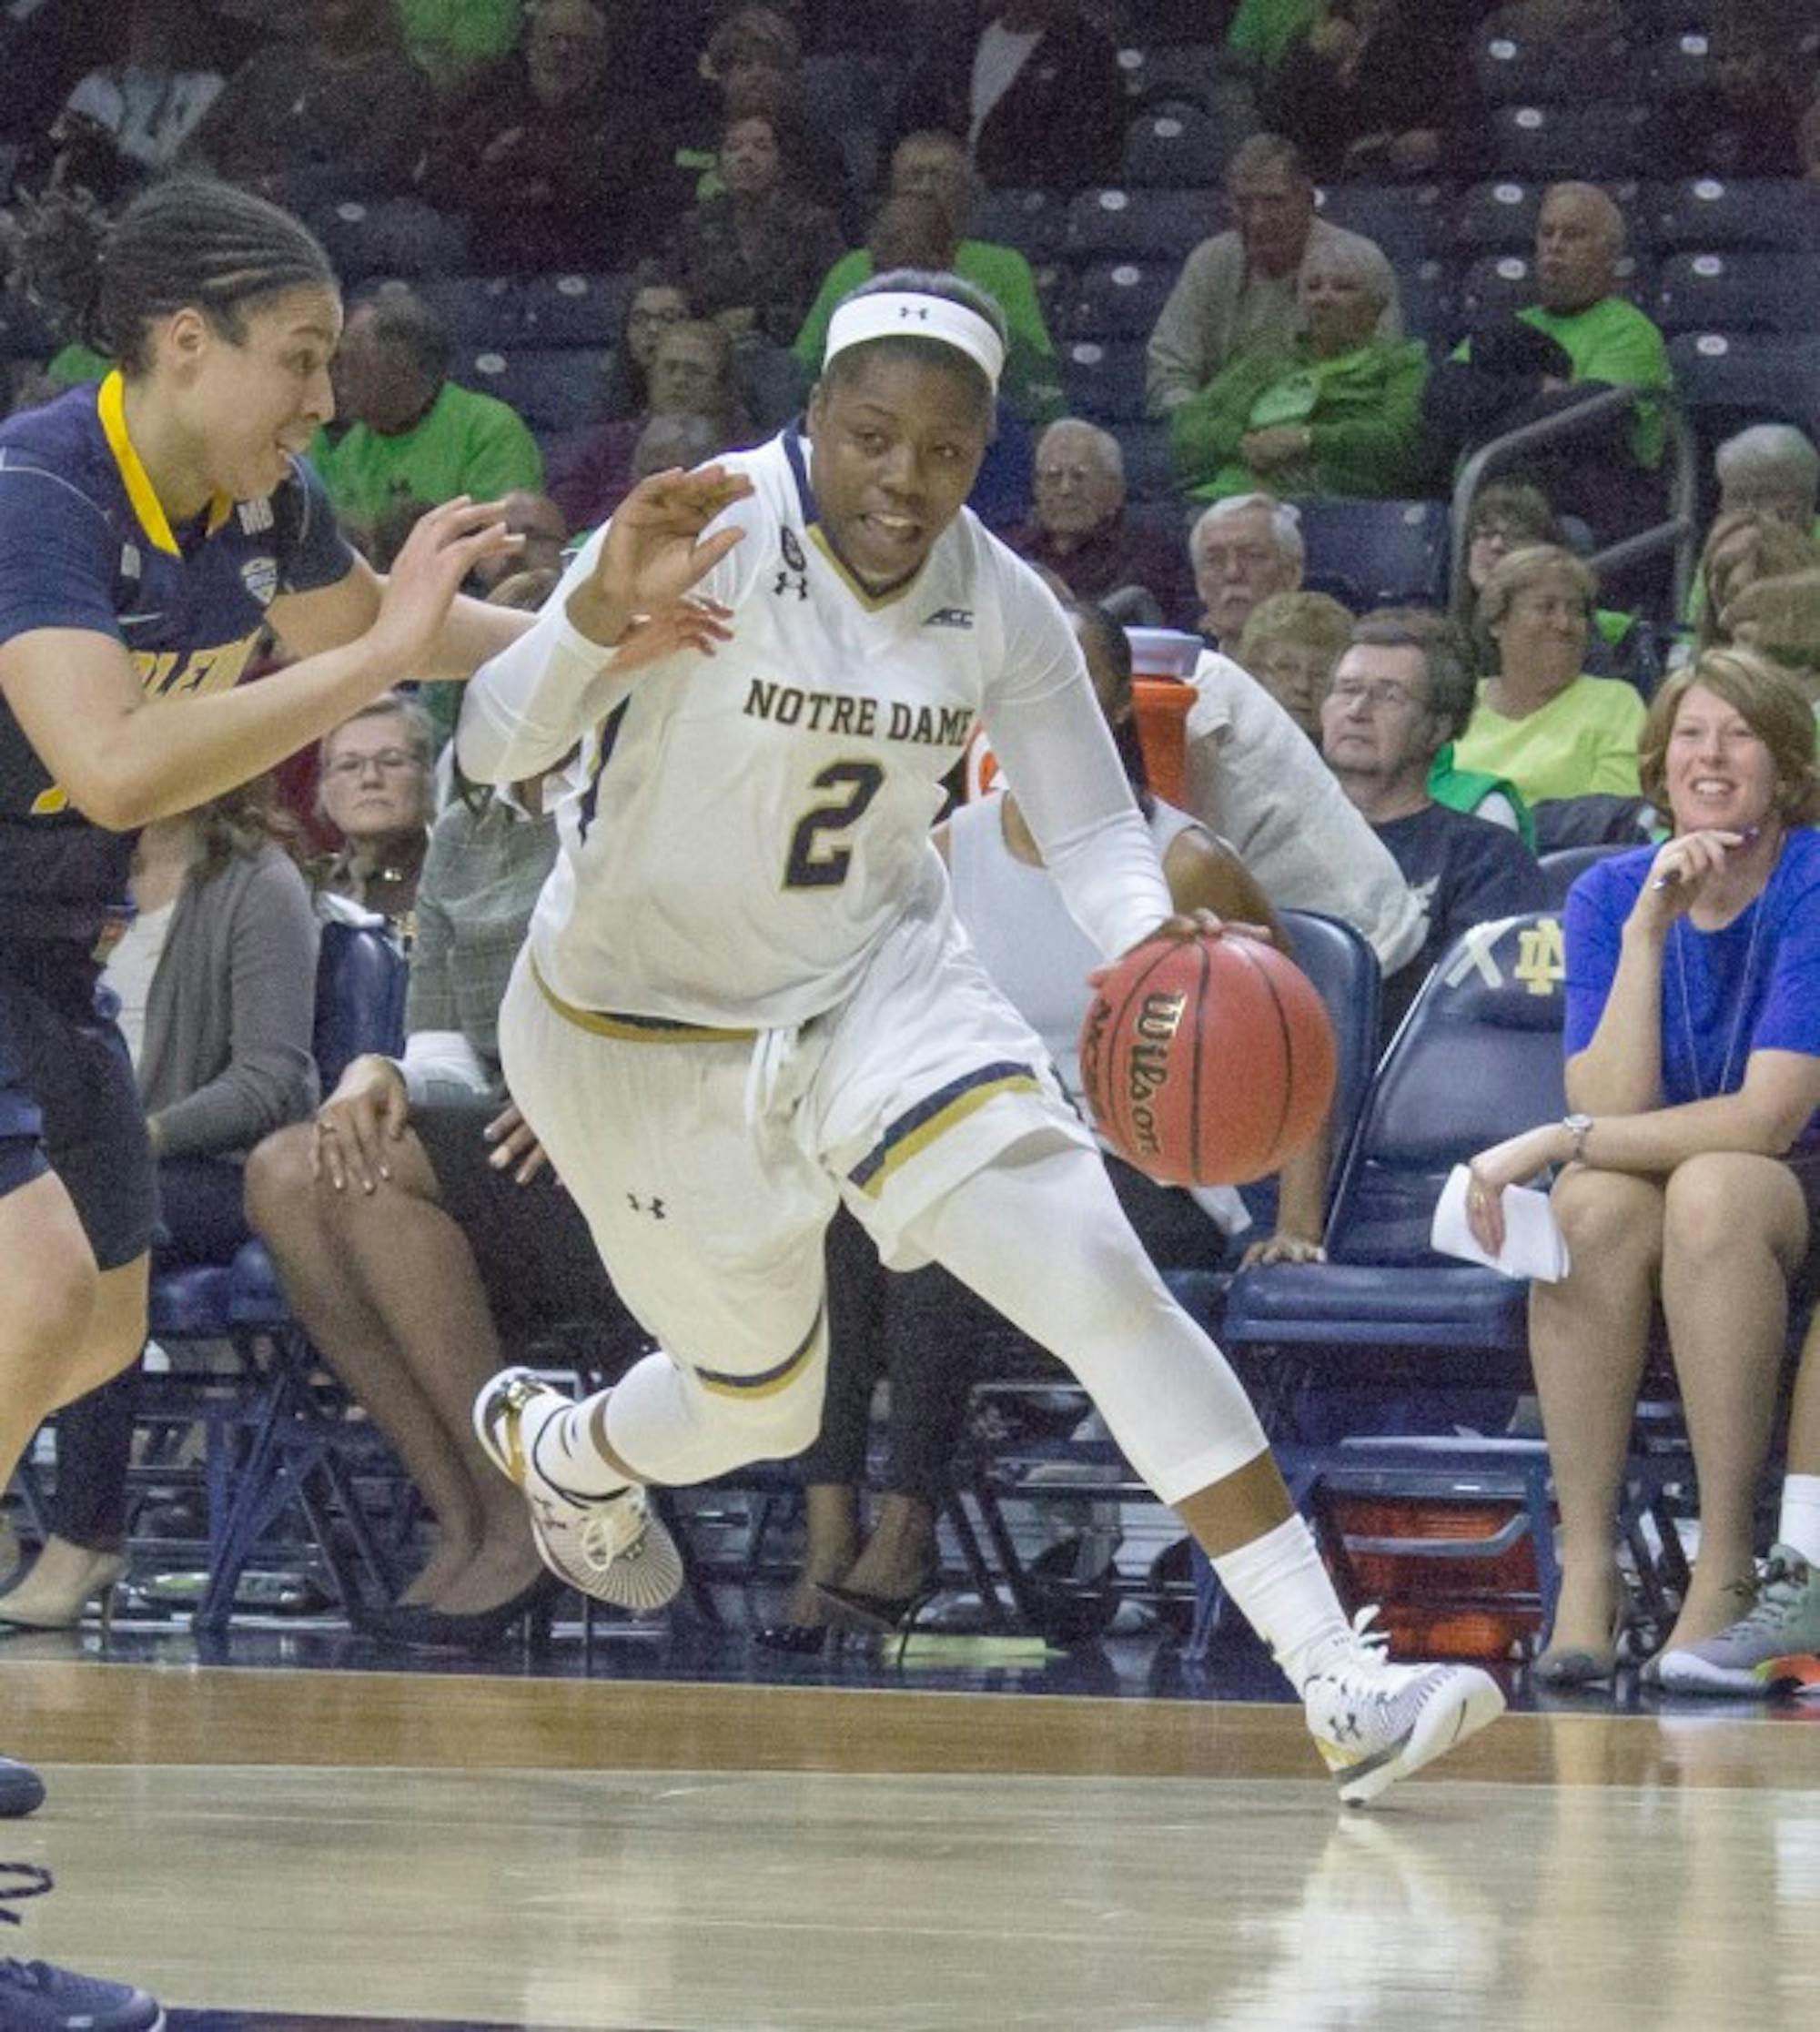 Freshman guard Arike Ogunbowale drives past a Toledo defender during Notre Dame’s 74-39 win on Nov. 18 at Purcell Pavilion.